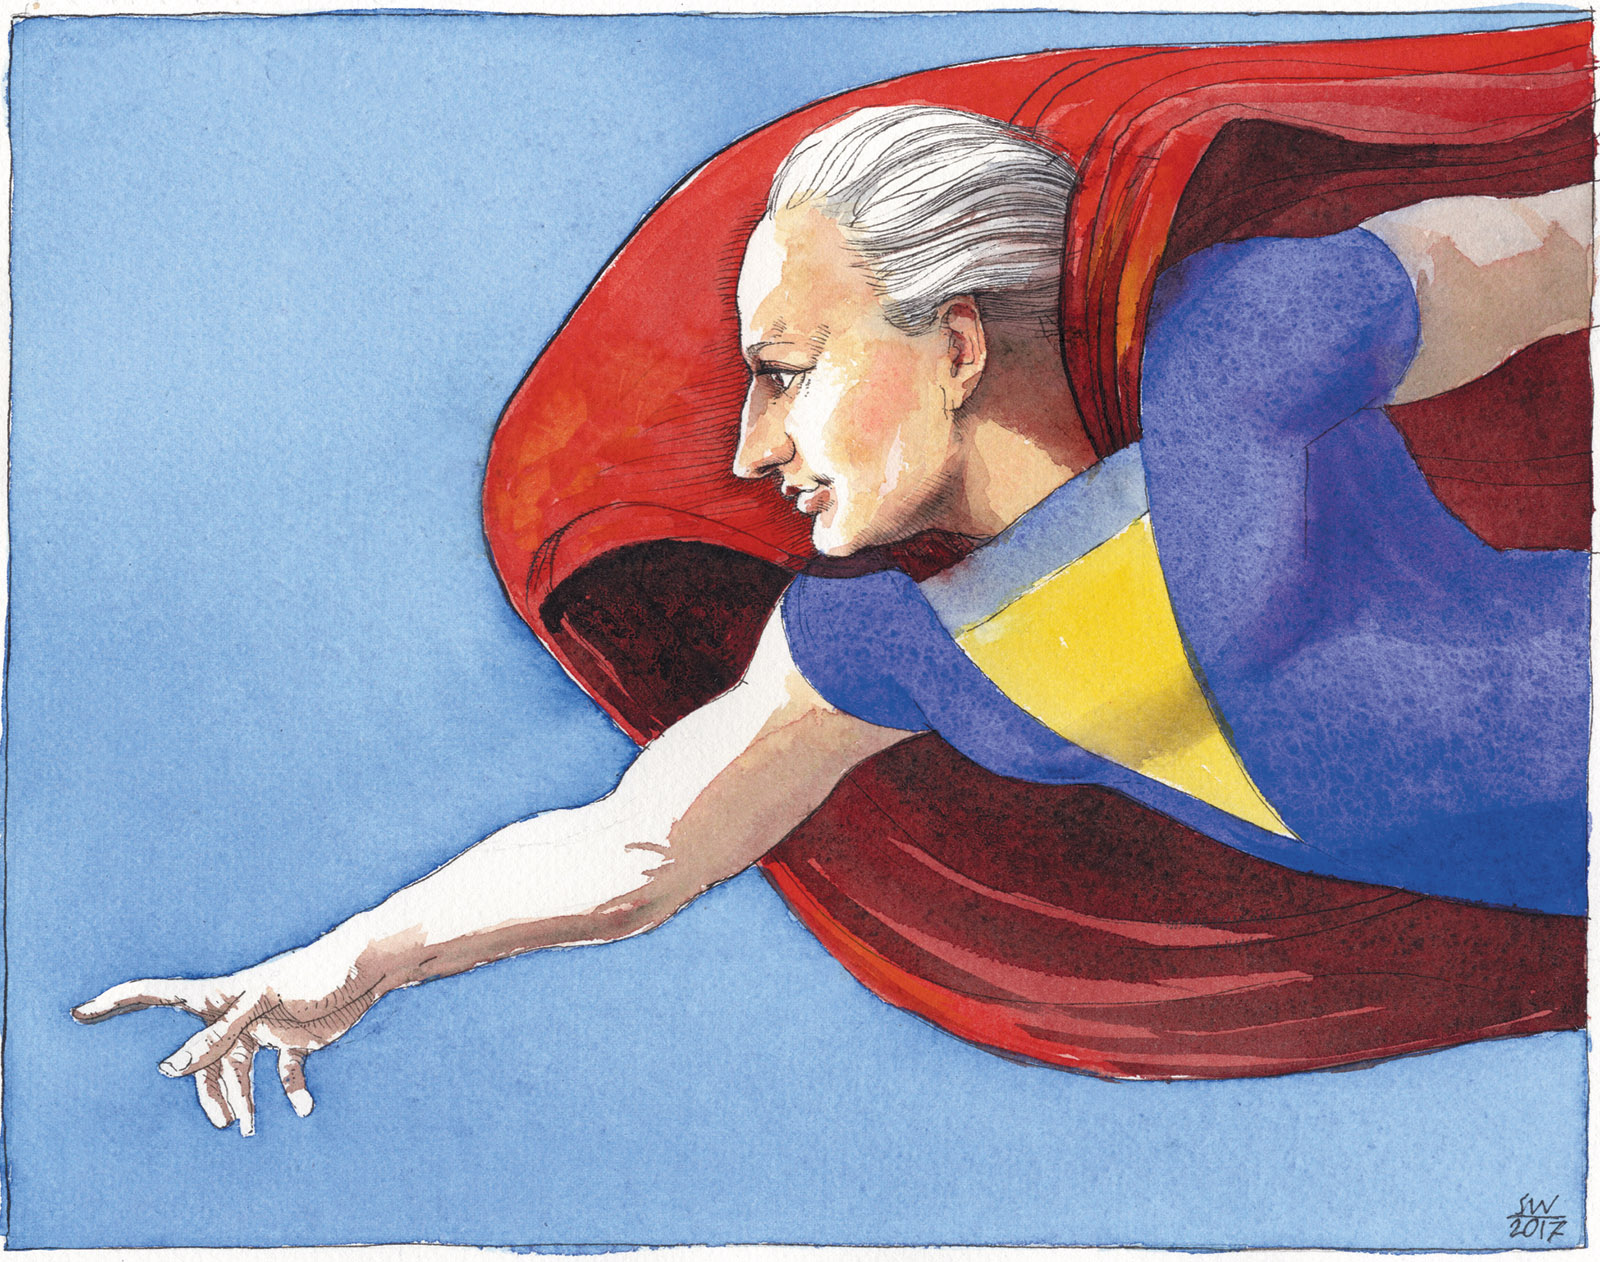 Super Goethe | by Ferdinand Mount | The New York Review of Books